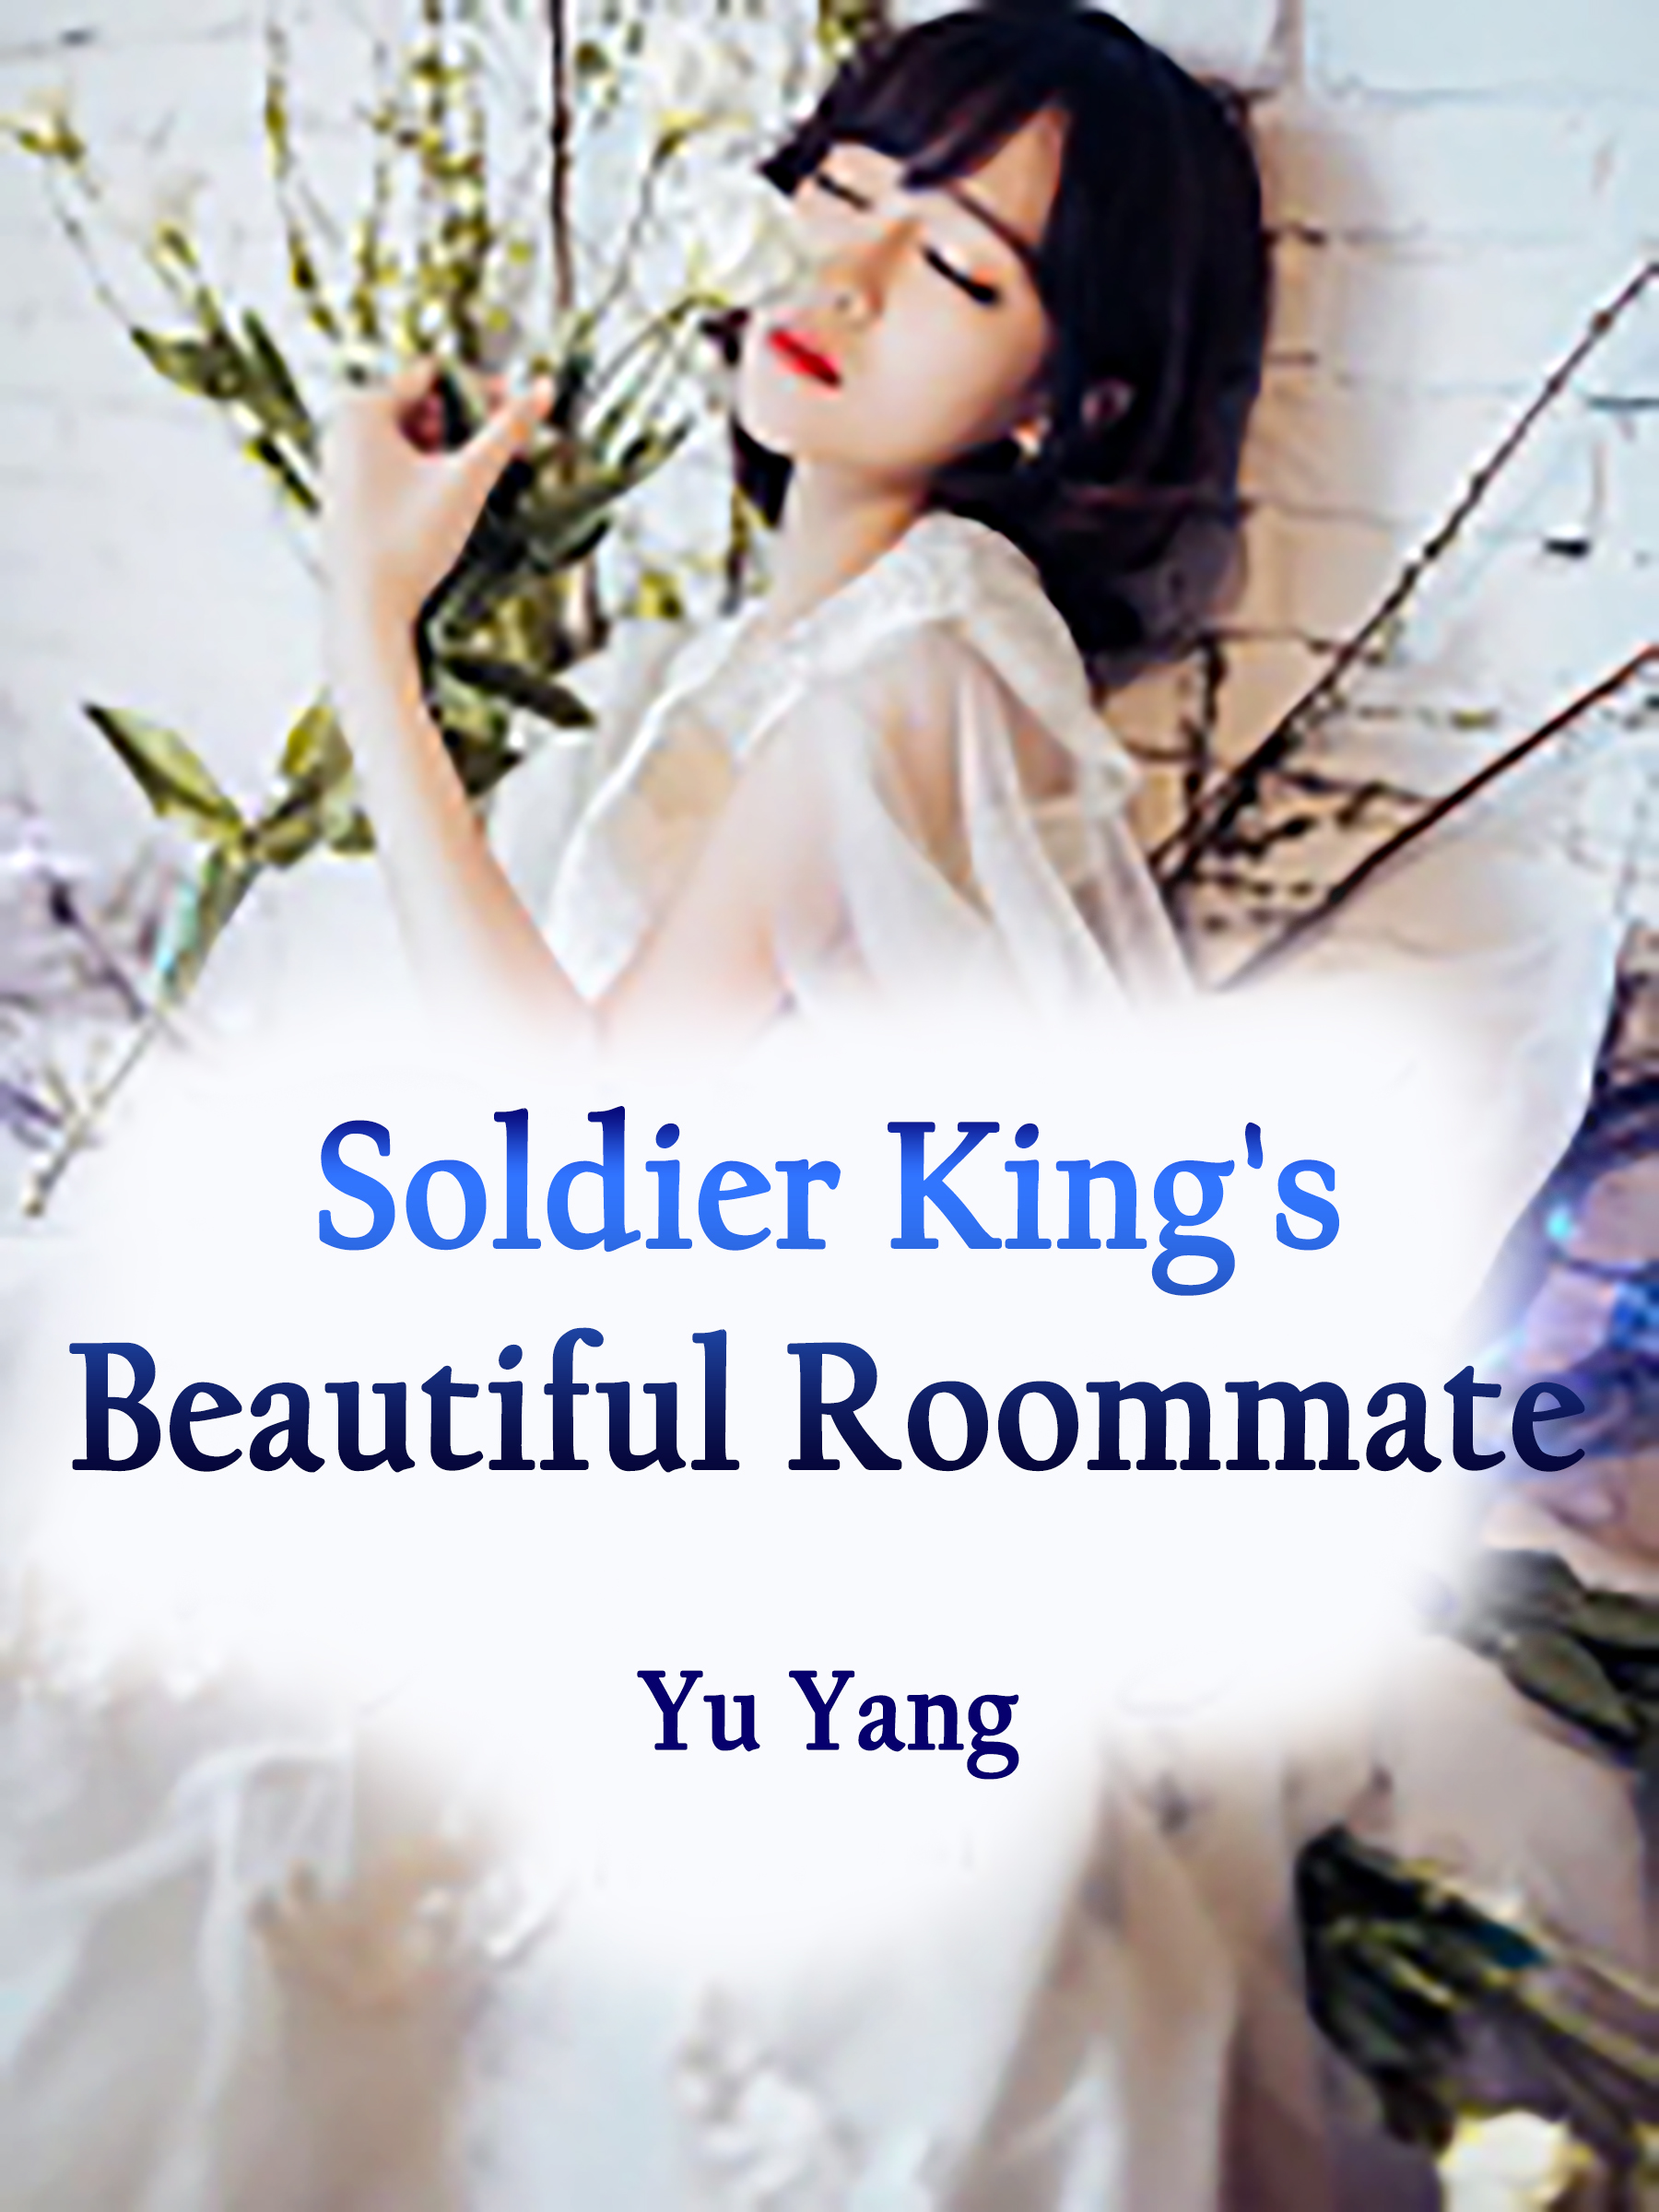 Soldier King's Beautiful Roommate